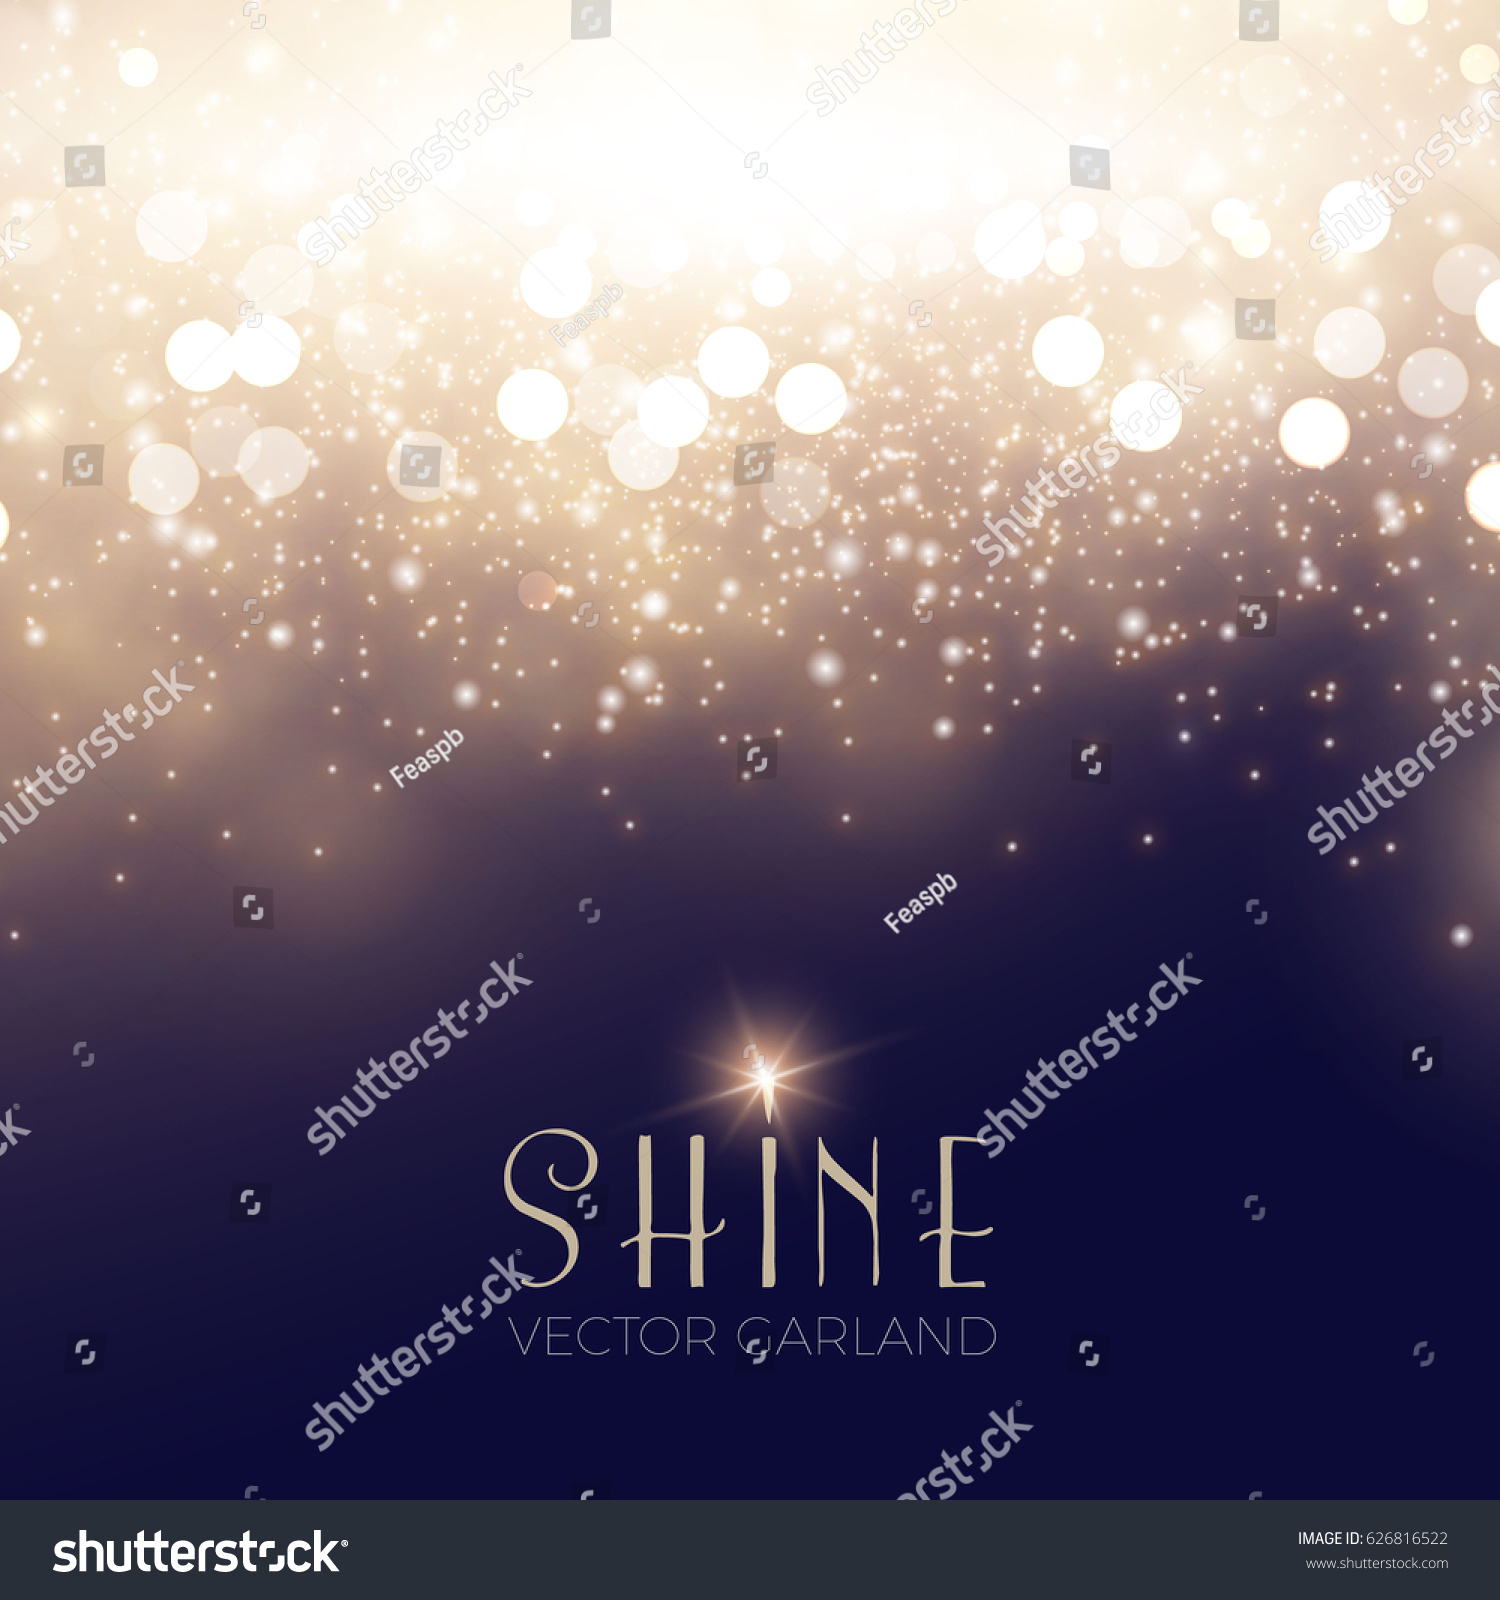 Abstract Elegant Shining Background. Twenties, Thirties and Art Deco Style. Bokeh, Lights and Fog Background. Vector illustration #626816522